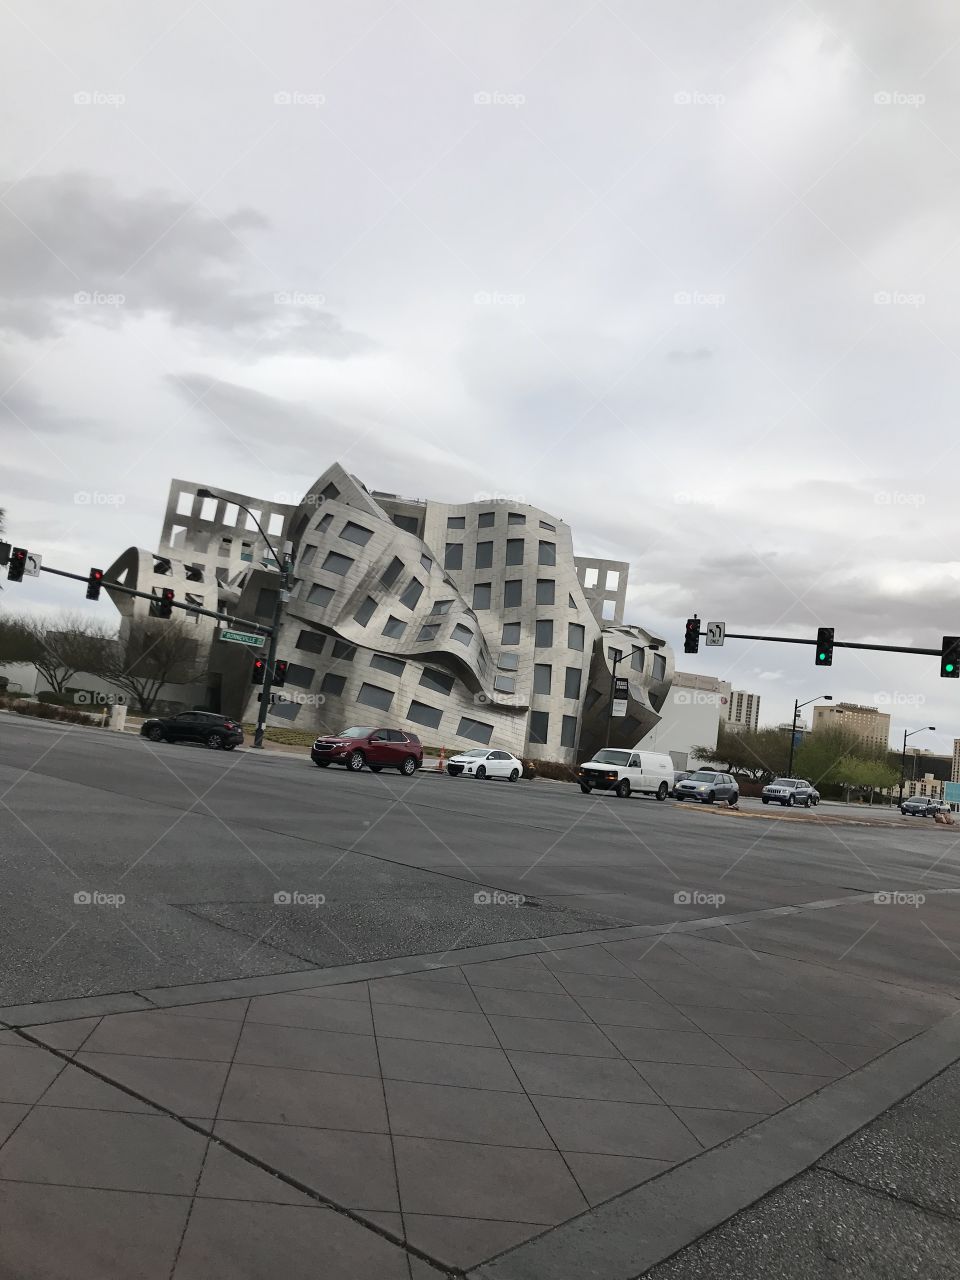 This is a real building in Las Vegas 